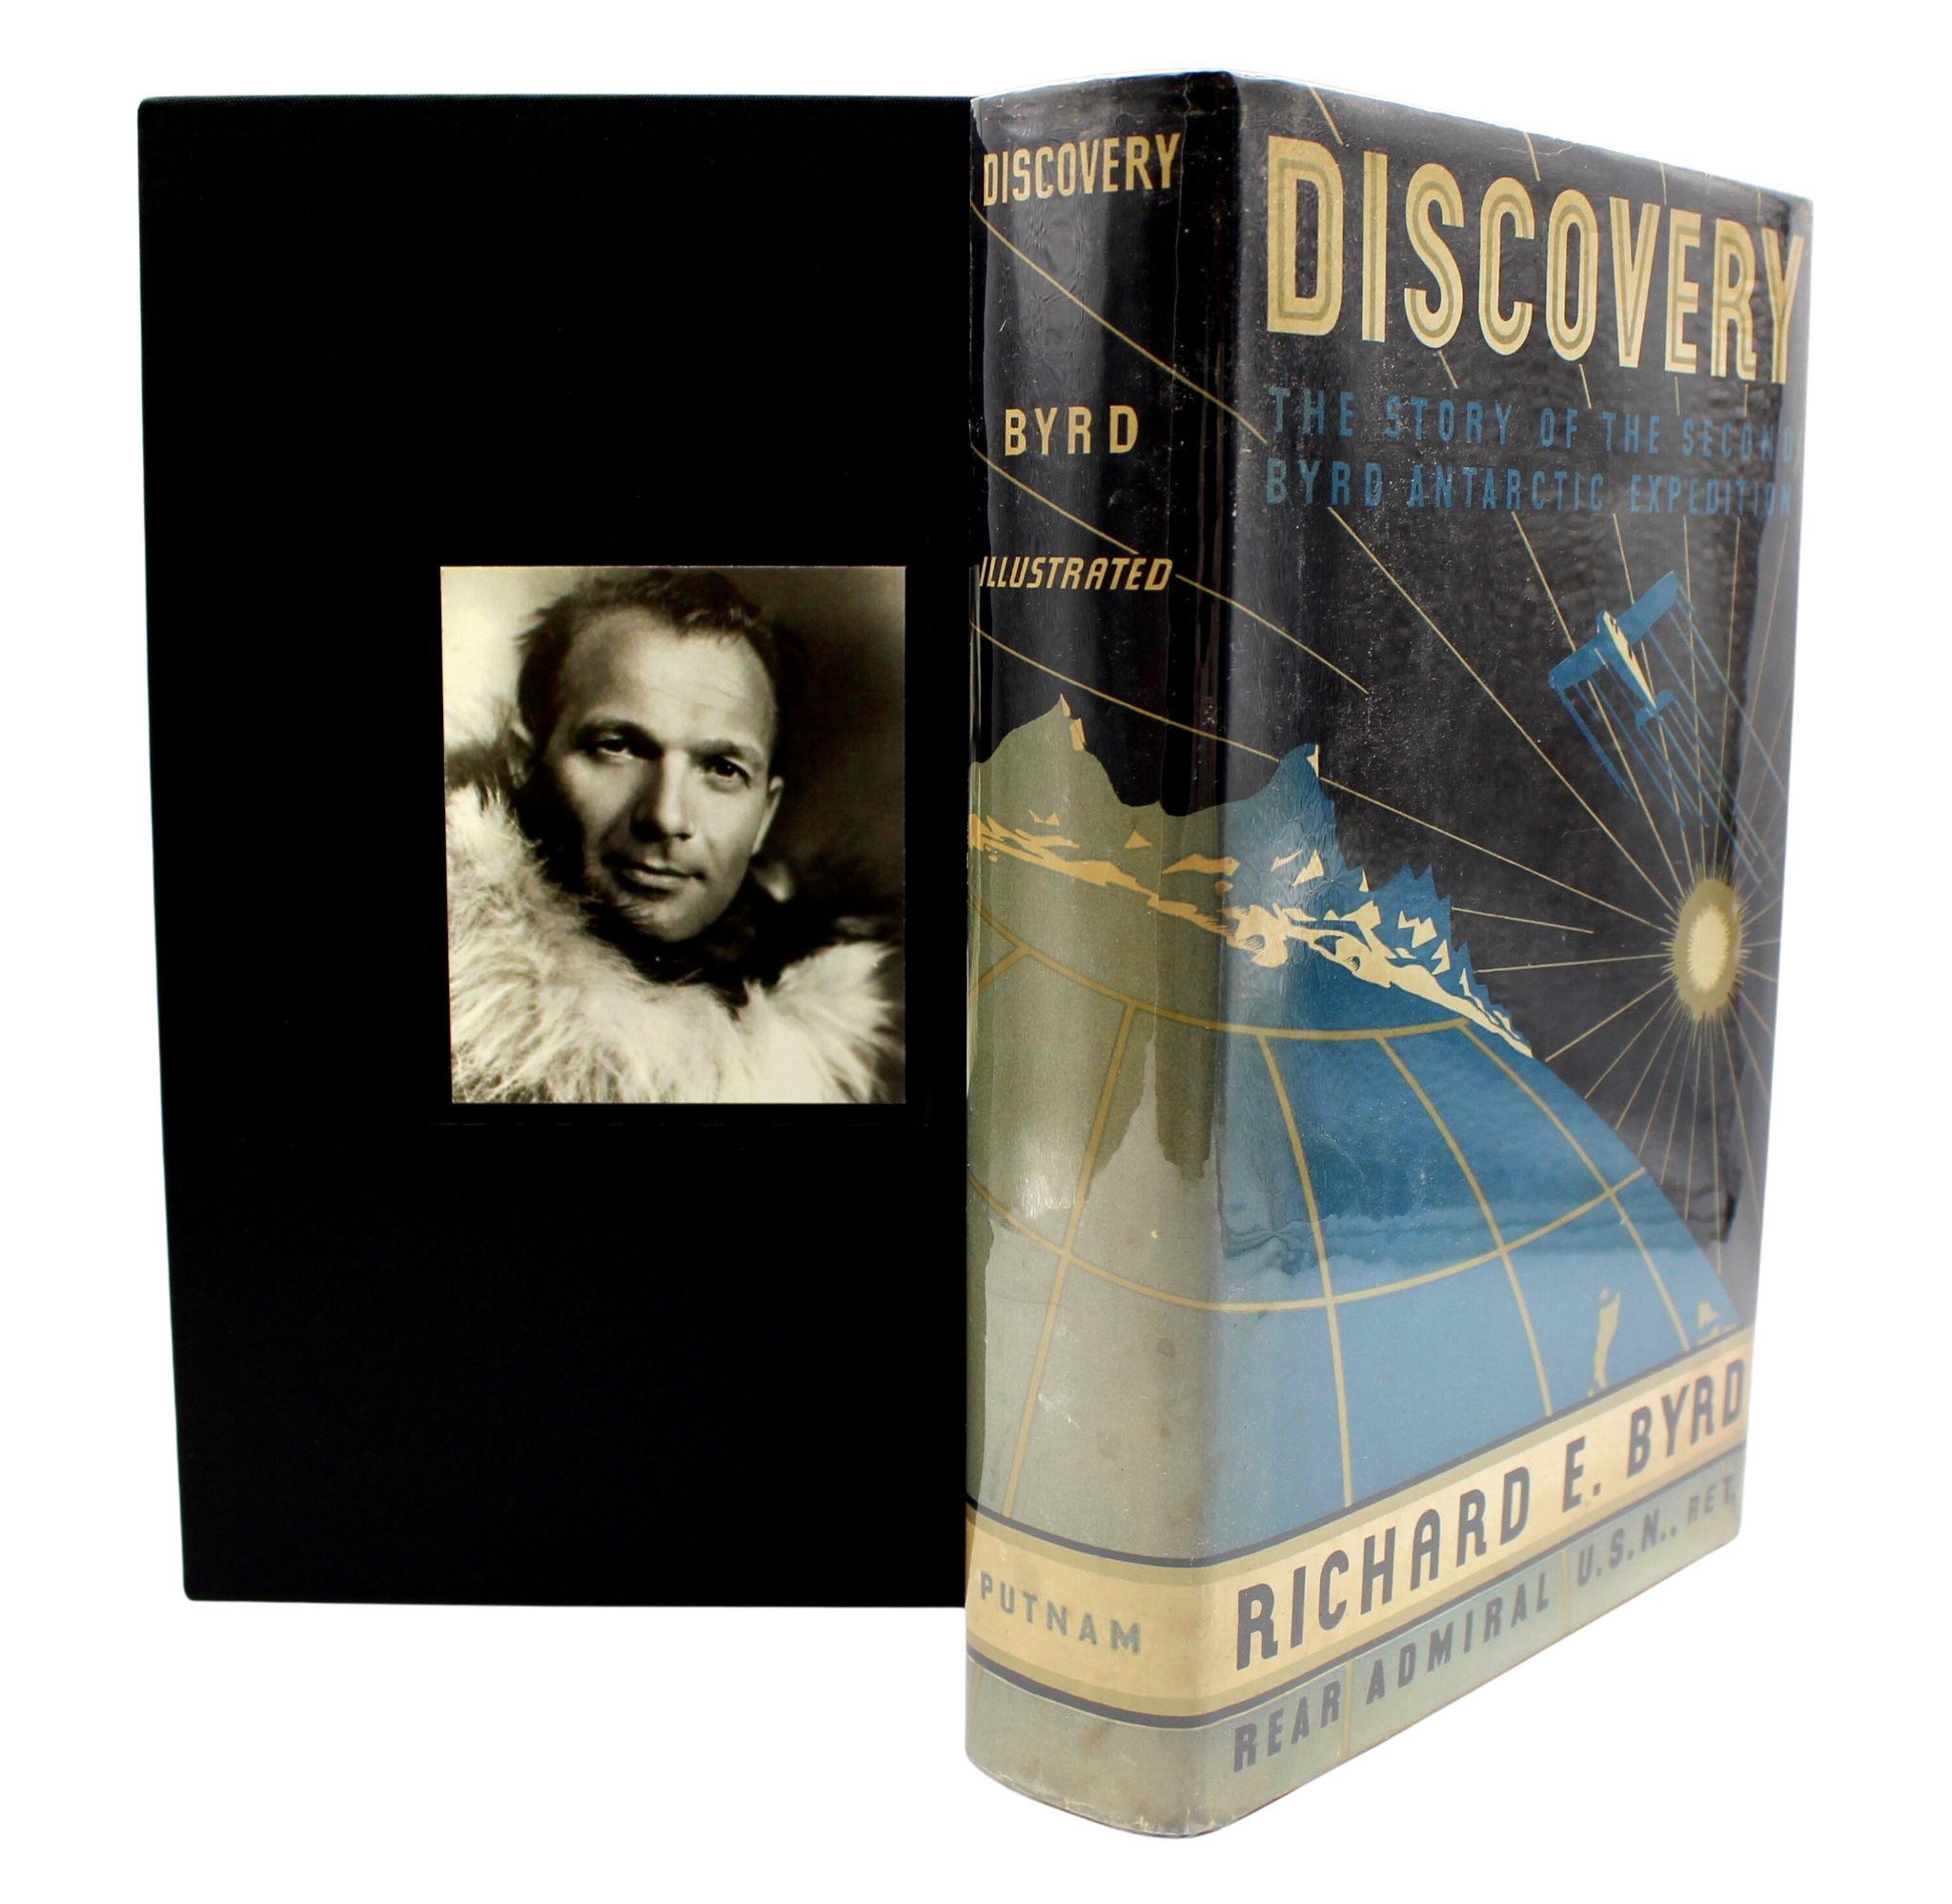 Byrd, Richard E. Discovery: The Story of the Second Byrd Antarctic Expedition. New York: G.P. Putnam’s Sons, 1935. Signed, stated first edition. Octavo. In original boards and dustjacket. Presented with a new archival slipcase. 

This is a stated